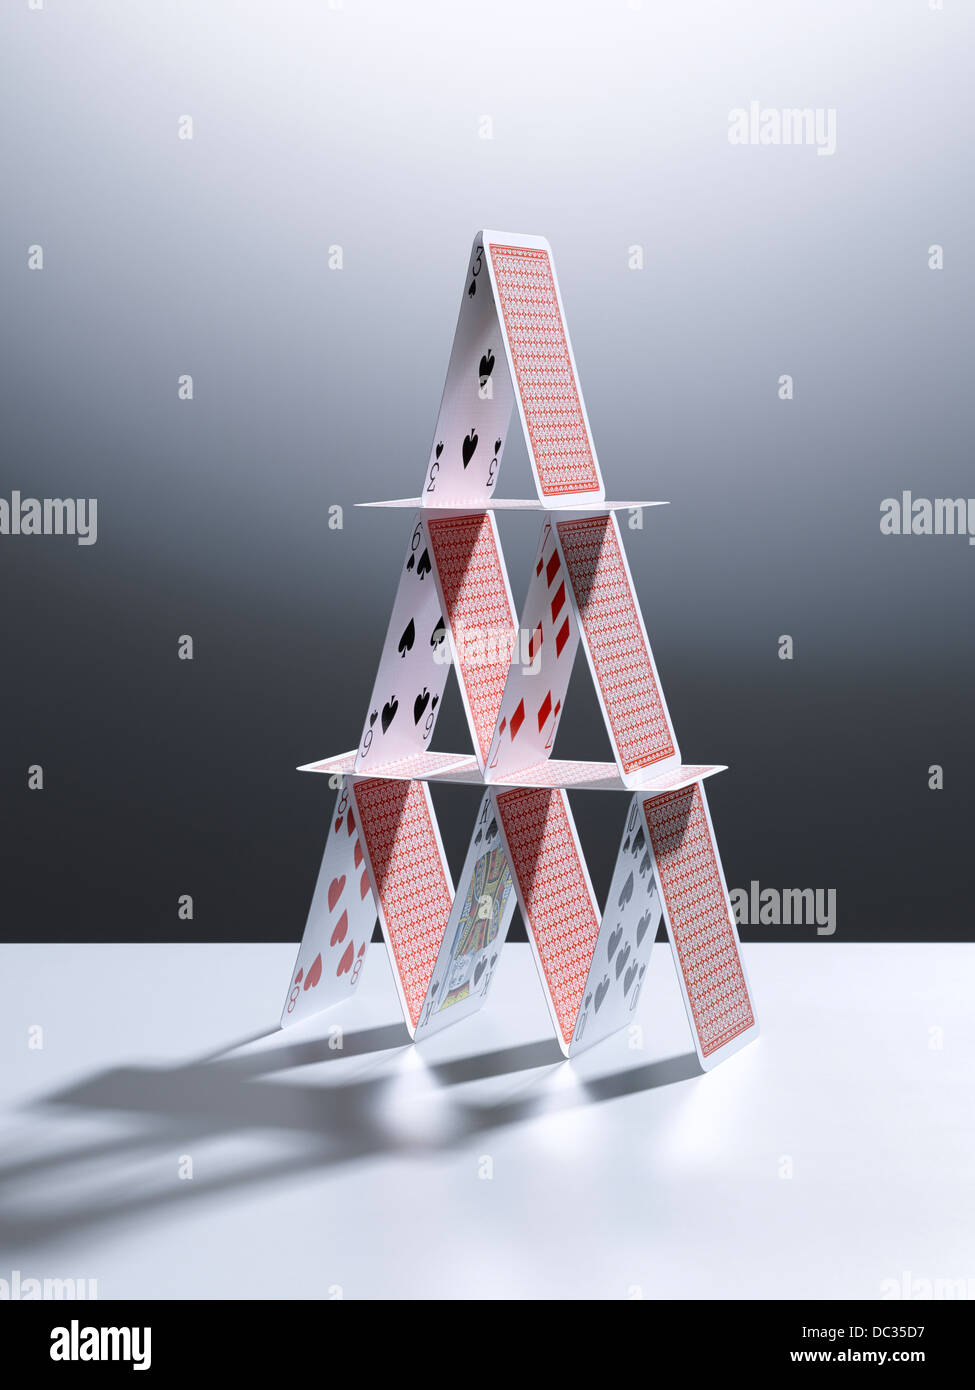 House of cards Stock Photo